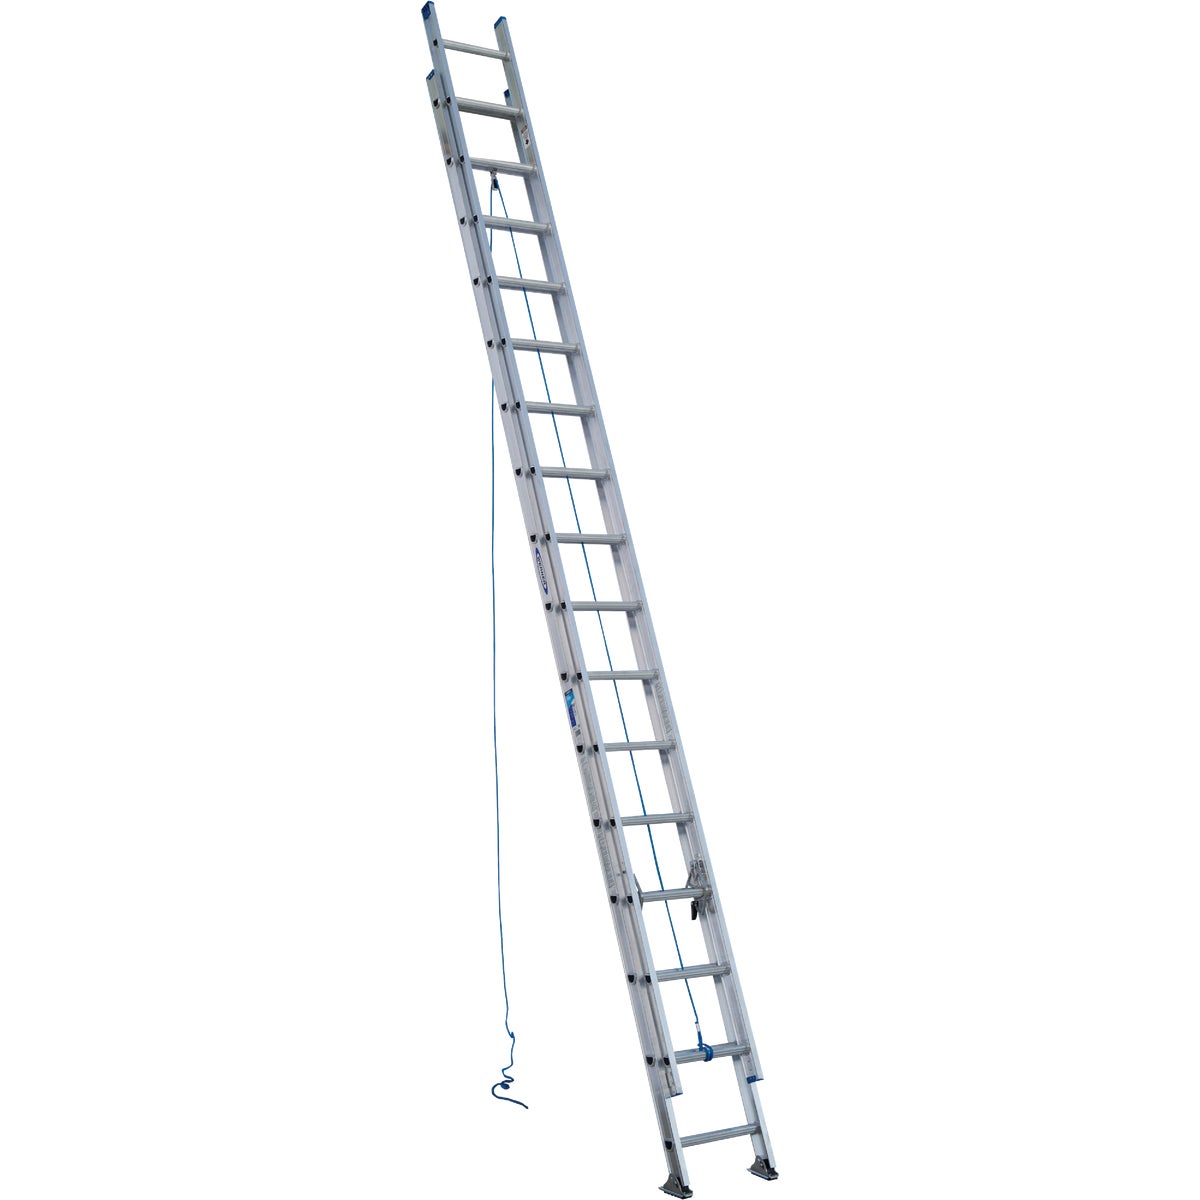 Werner 32 Ft. Aluminum Extension Ladder with 250 Lb. Load Capacity Type I Duty Rating